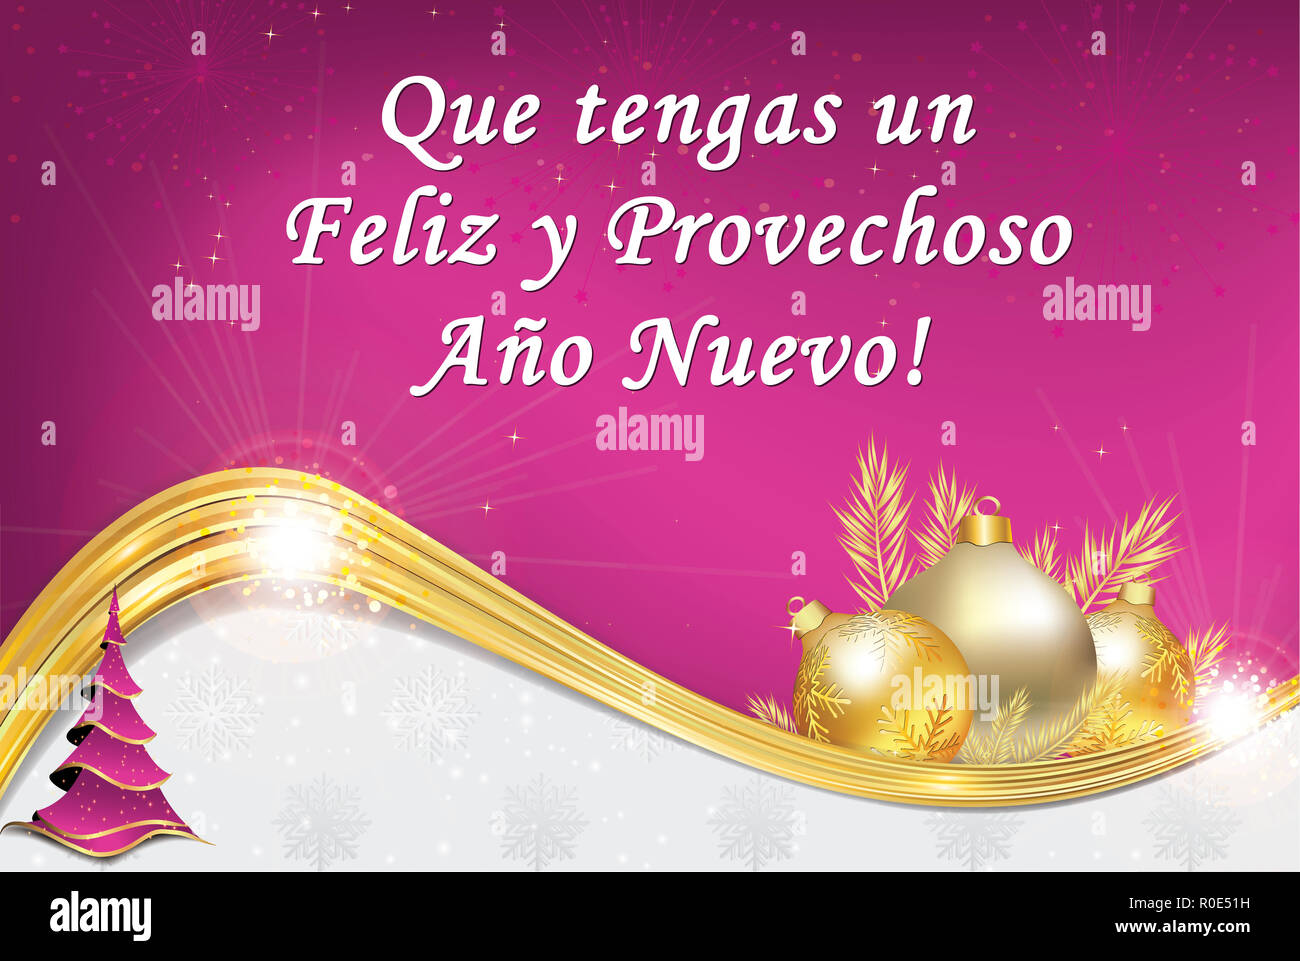 Spanish Greeting Card Designed For The Season S Greeting Celebration Text Translation Wishing You A Merry Christmas And A Happy New Year Stock Photo Alamy